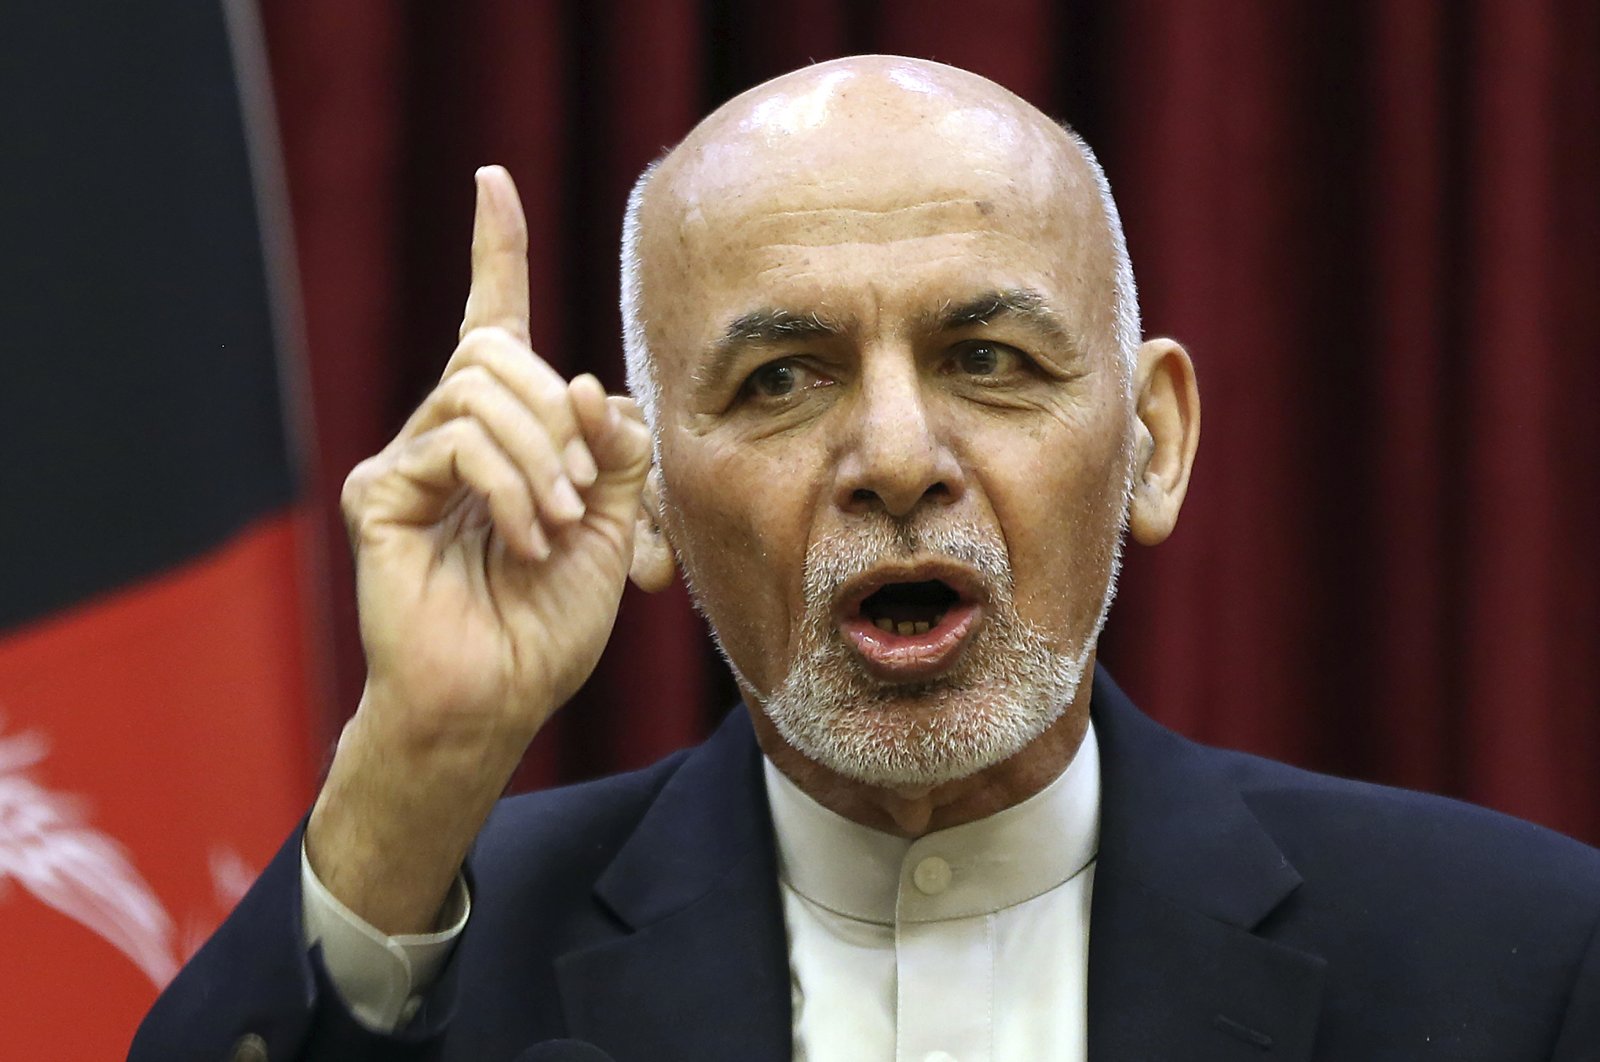 Afghan President Ashraf Ghani speaks during a news conference in presidential palace, Kabul, March 1, 2020. (AP Photo)